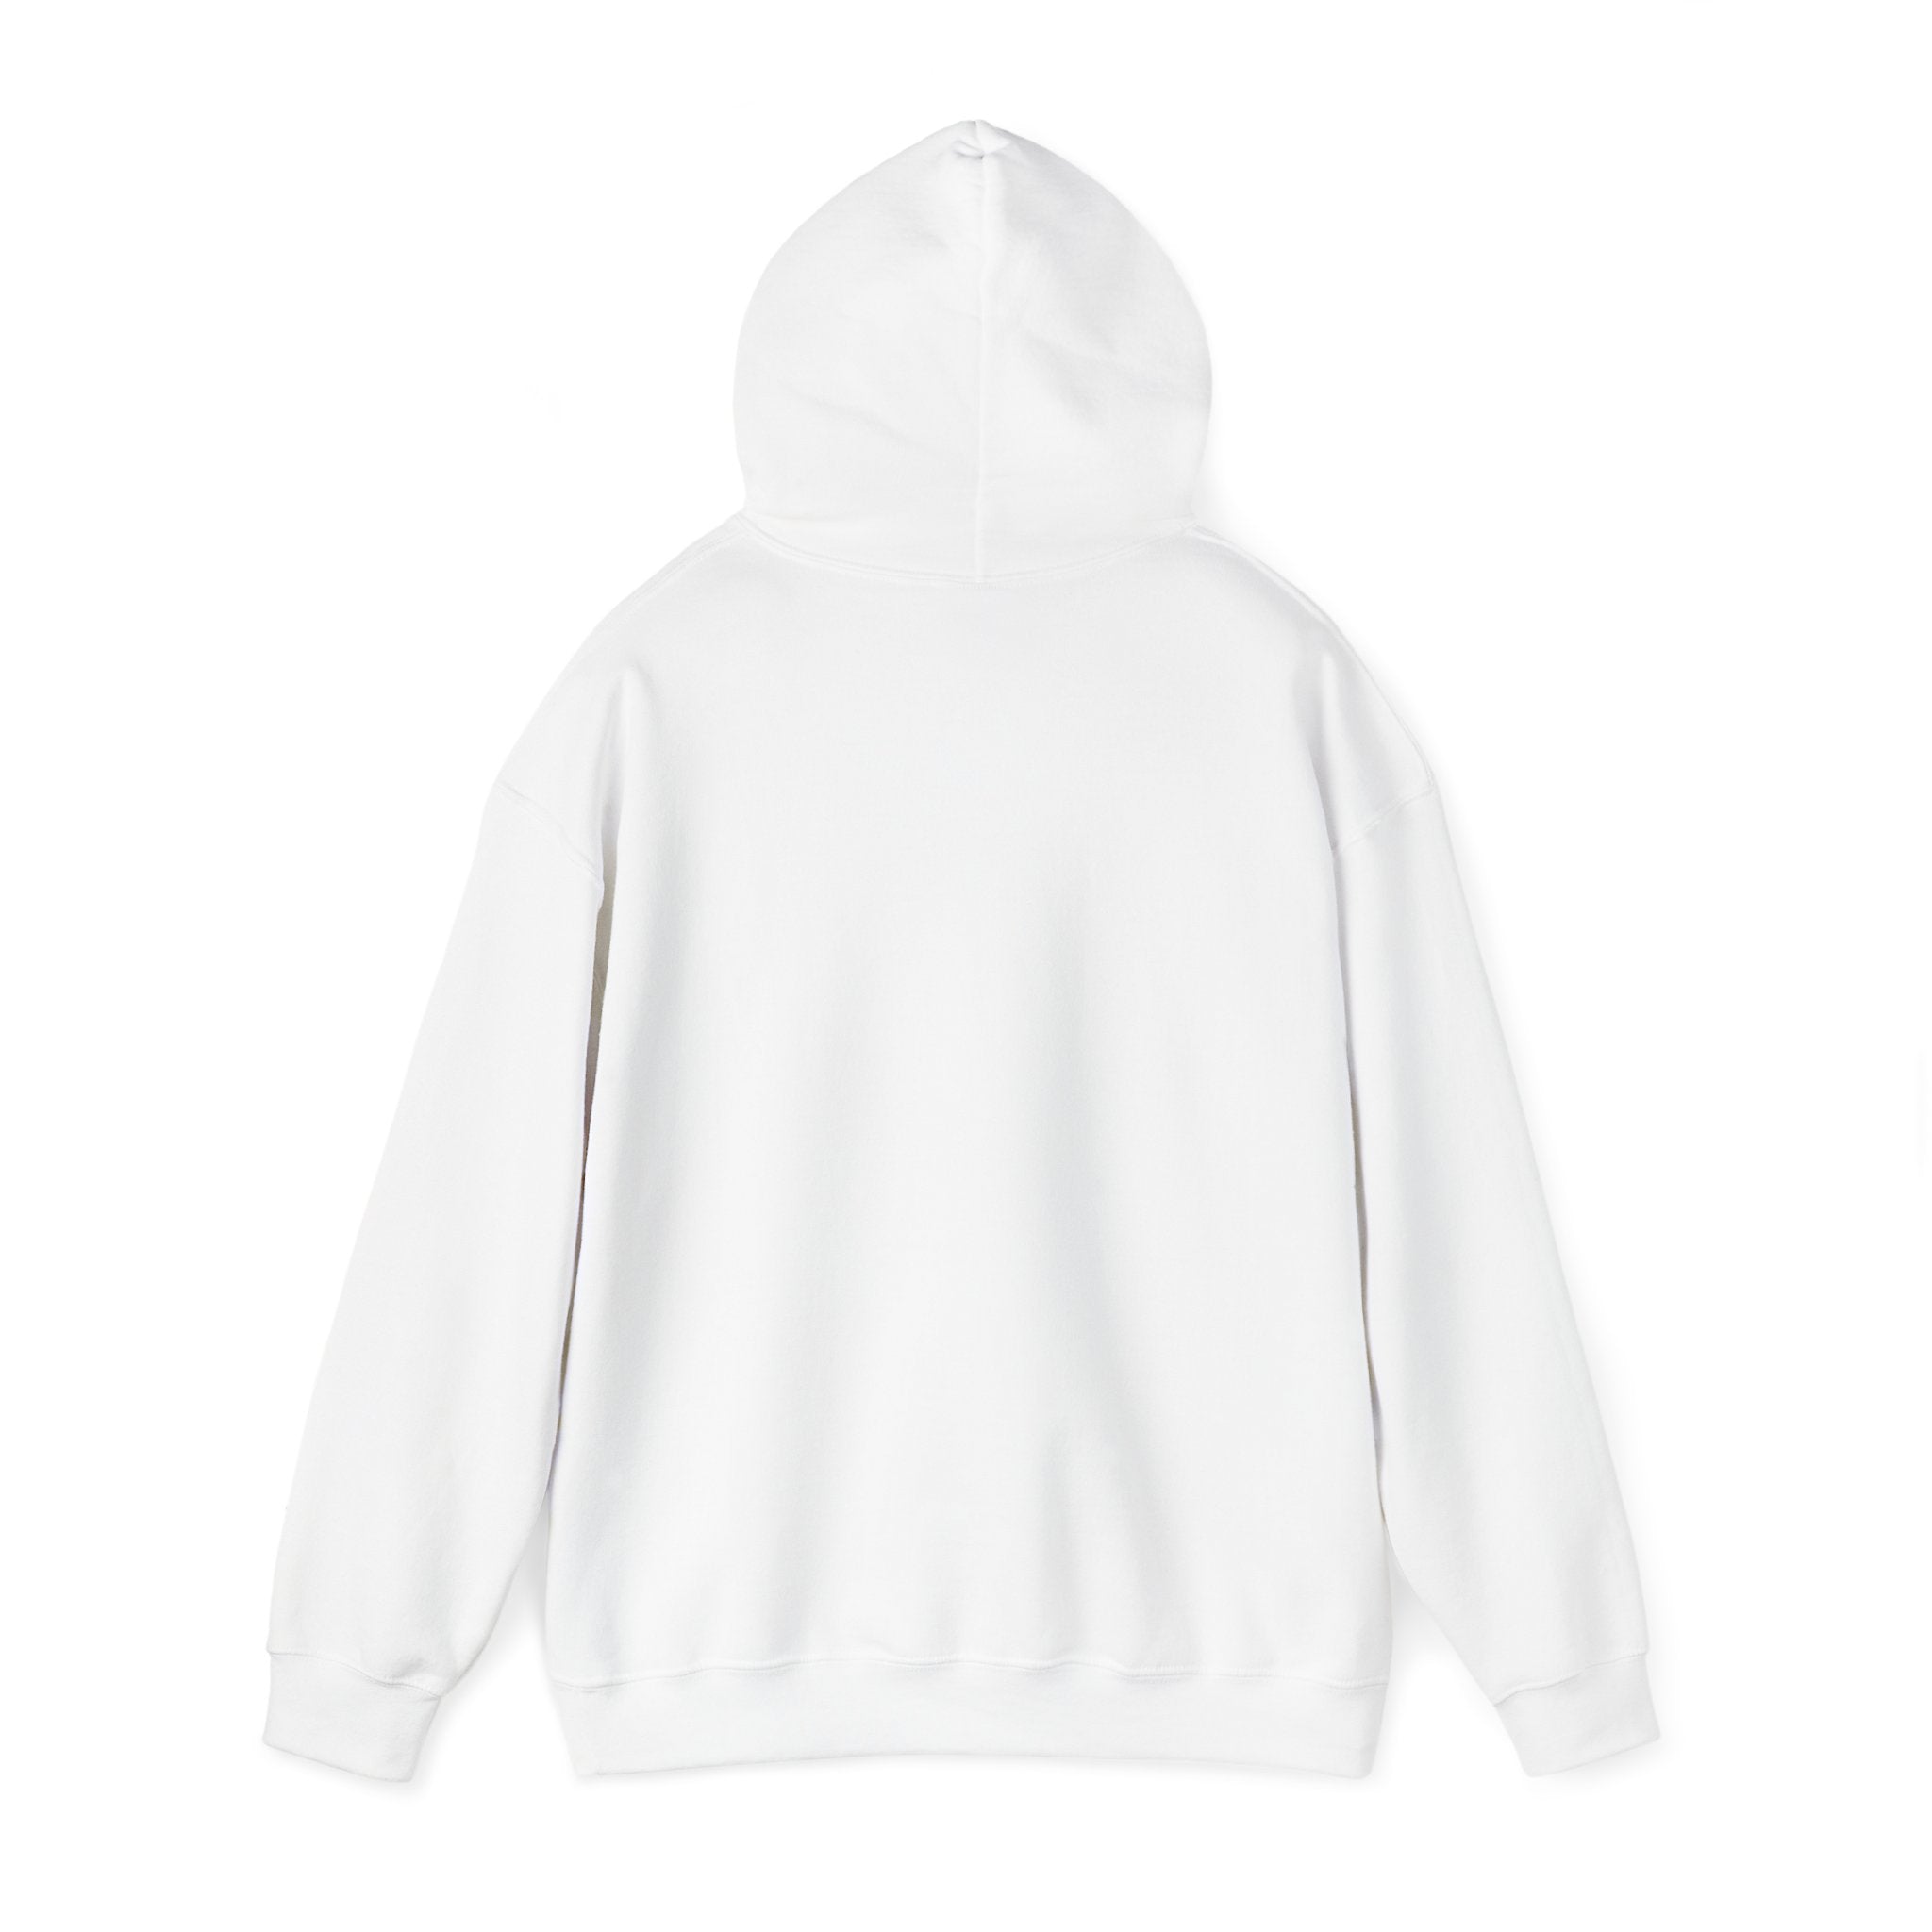 A back view of a plain white hooded sweatshirt with long sleeves, showcasing the LA-TI-NA - Hooded Sweatshirt design.